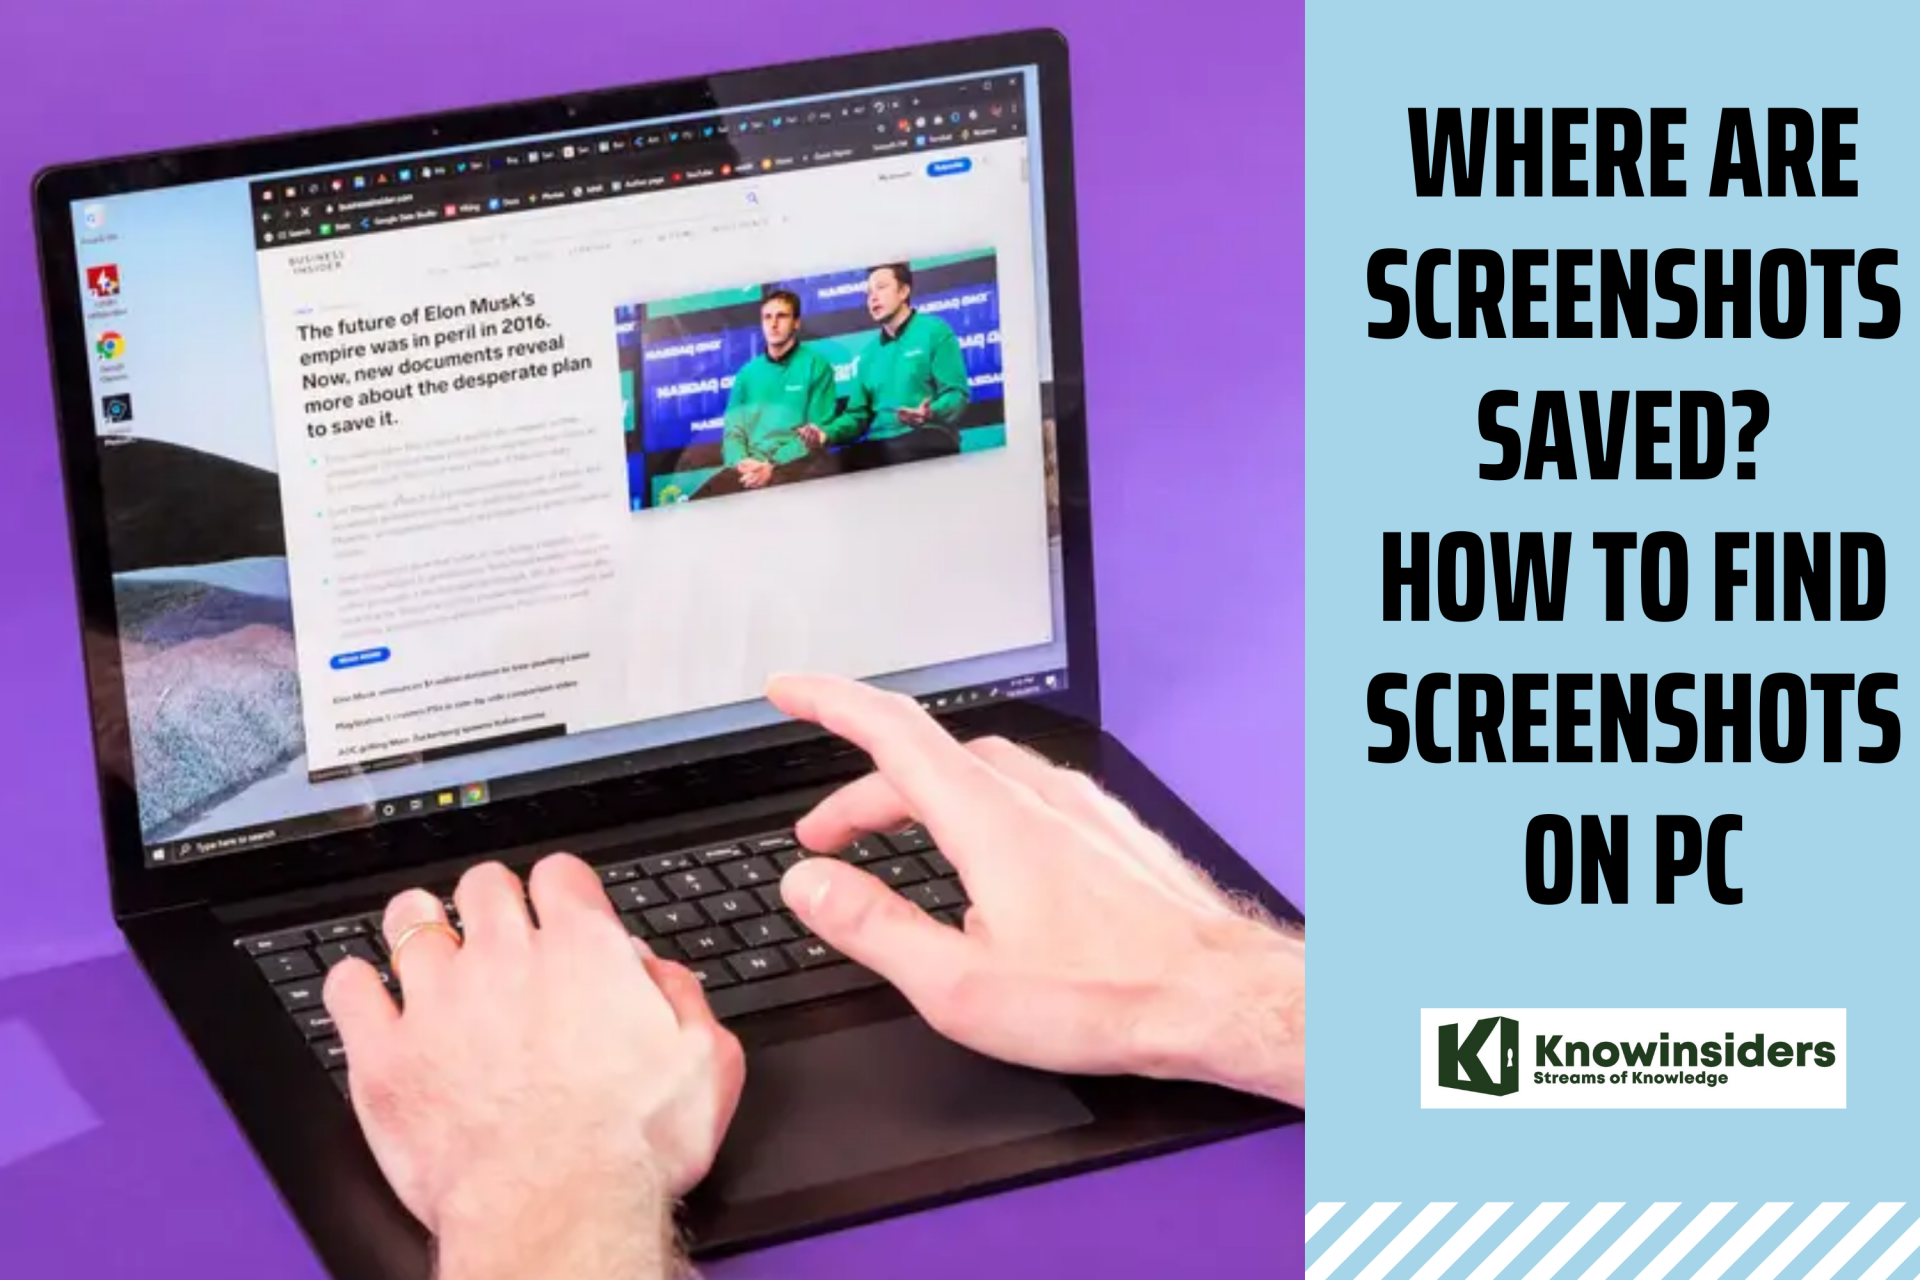 Where Are Screenshots Saved and How to Find Screenshots on PC